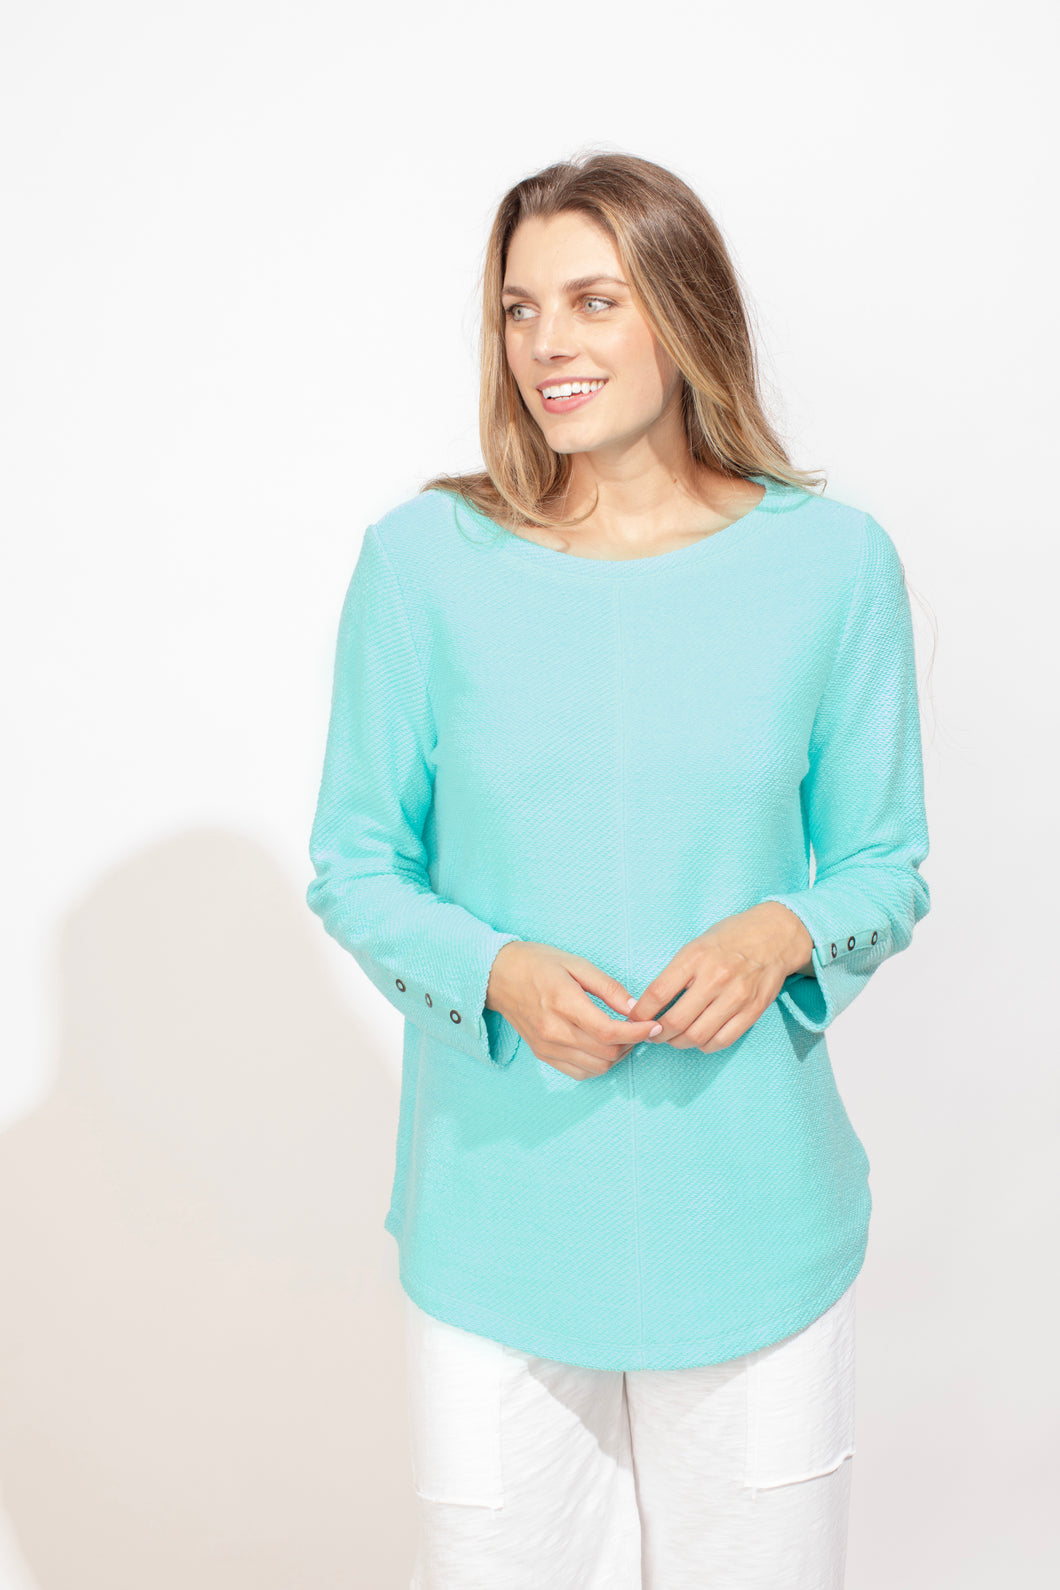 Escape By Habitat Turquoise Long Sleeve Boat Neck Top with Seam Detail